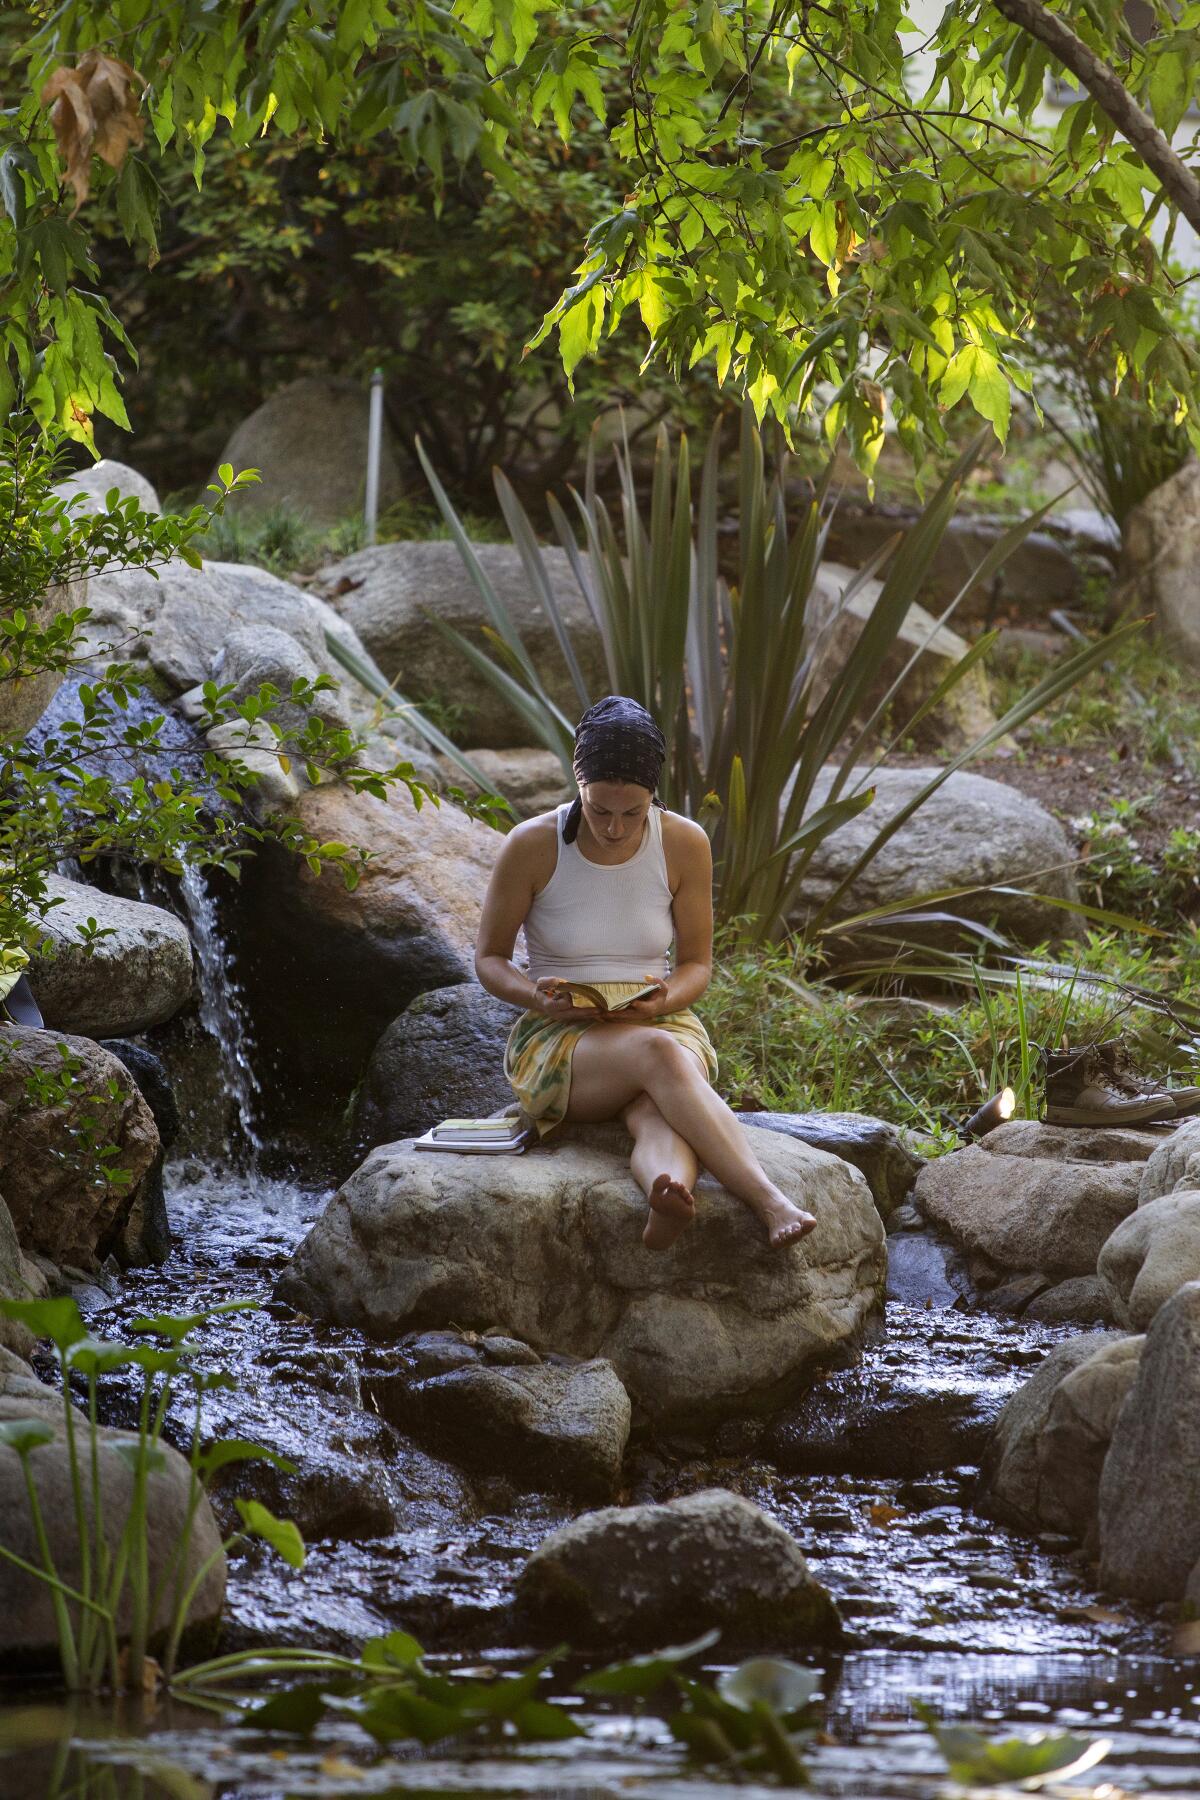 A woman reads next to a small waterfall